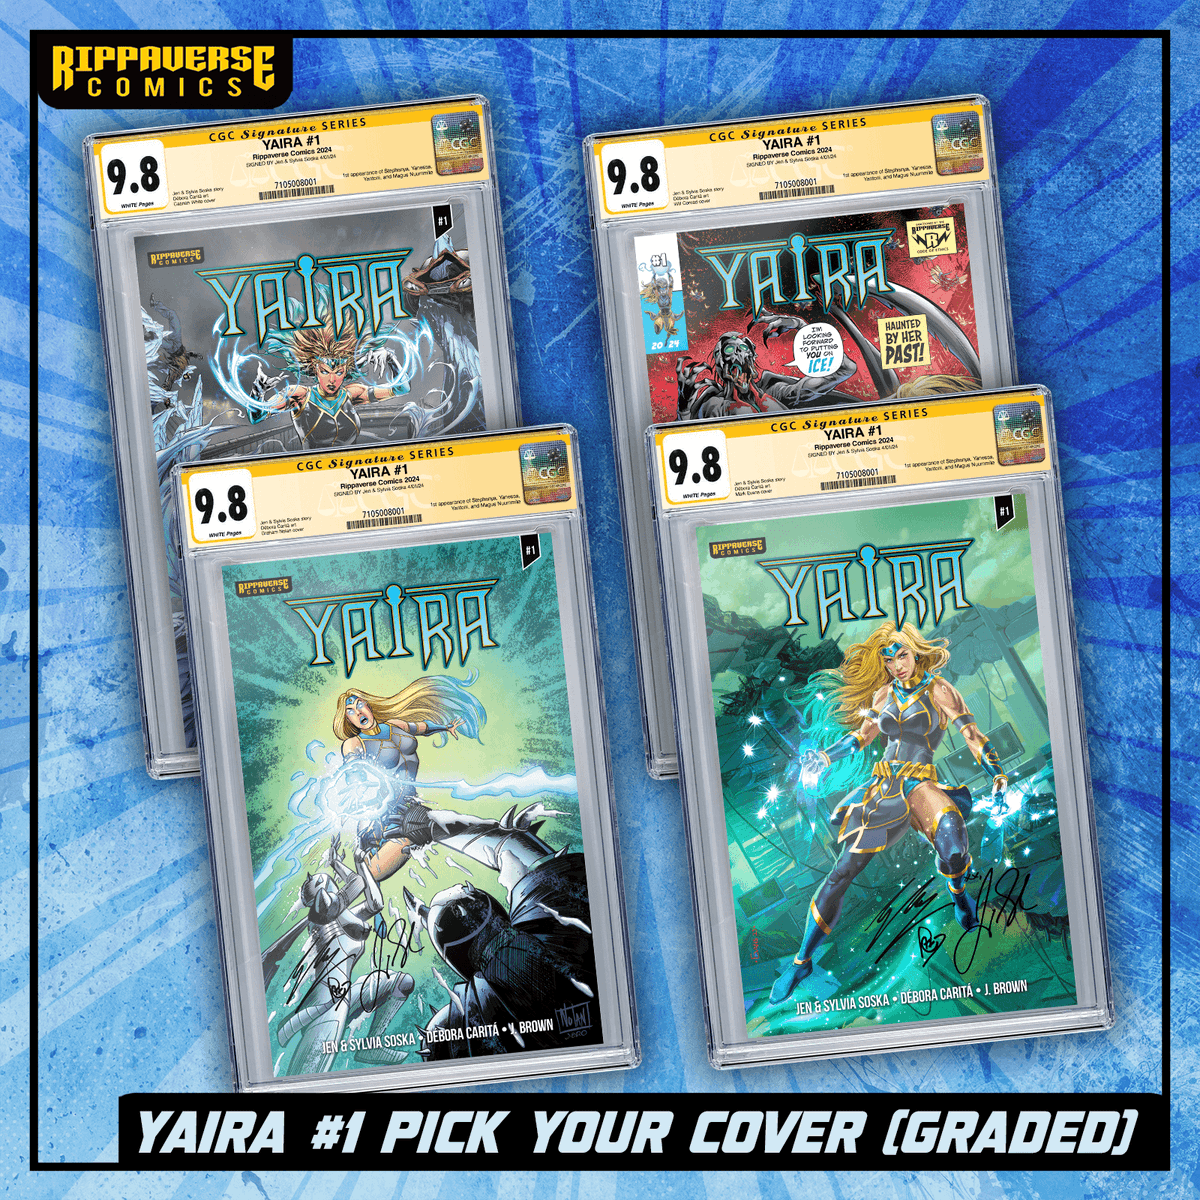 Deck your walls with graded covers! Add the CGC Signature Series Yaira#1 to your cart! Autographed by the writer and our Loremasters, Jen & Sylvia Soska, you're gonna want to get in on this action. Pre-order yours TODAY!